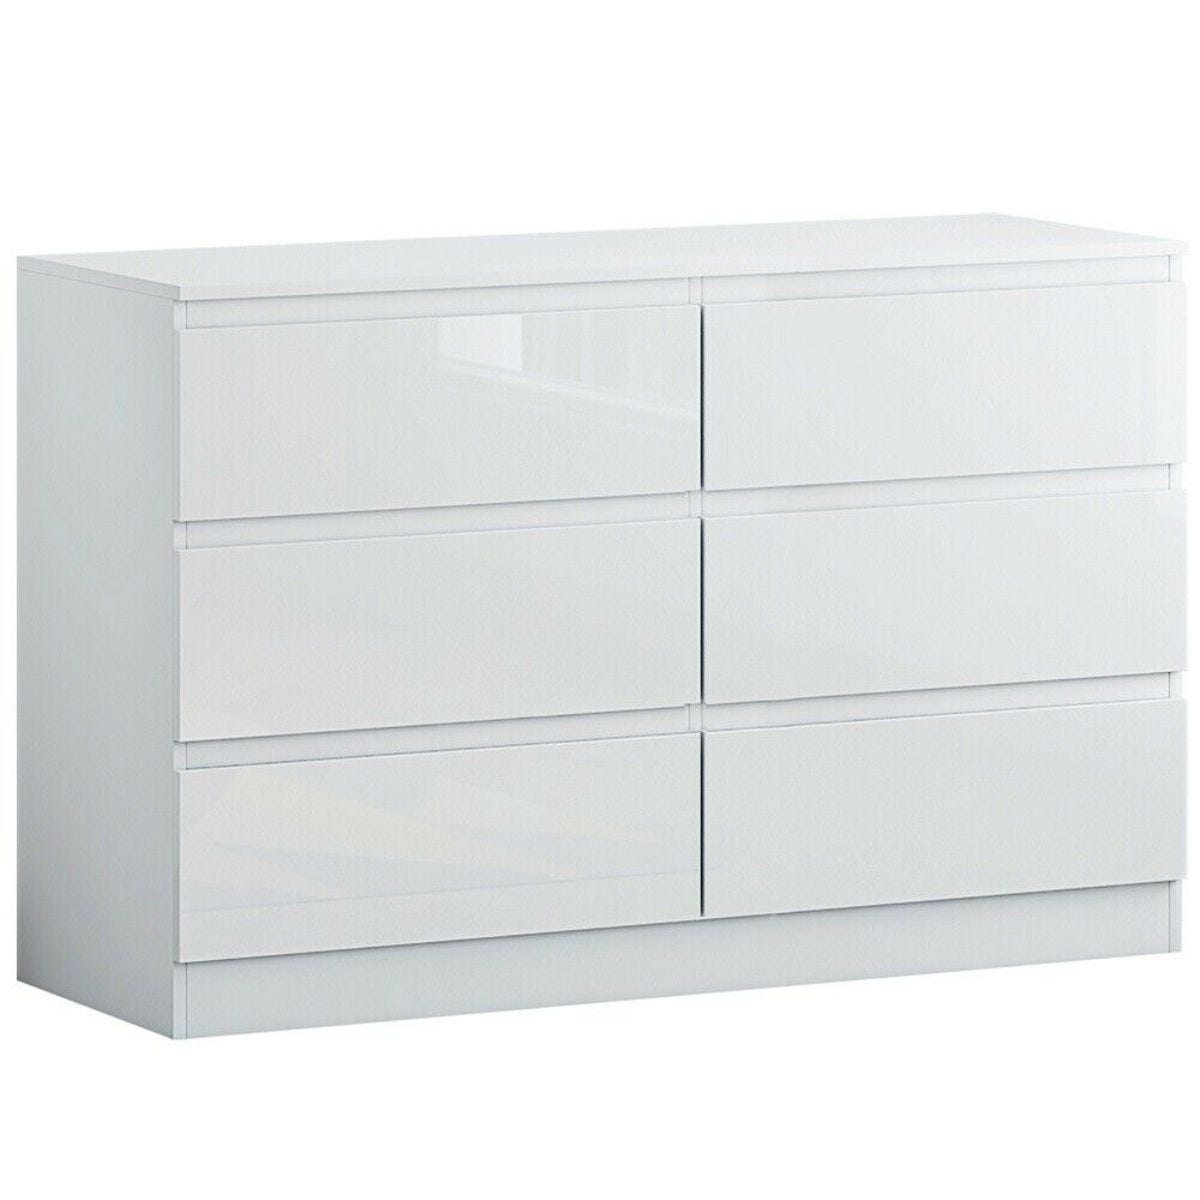 FWStyle 6 Drawer Bedroom Chest Of Drawers White Gloss